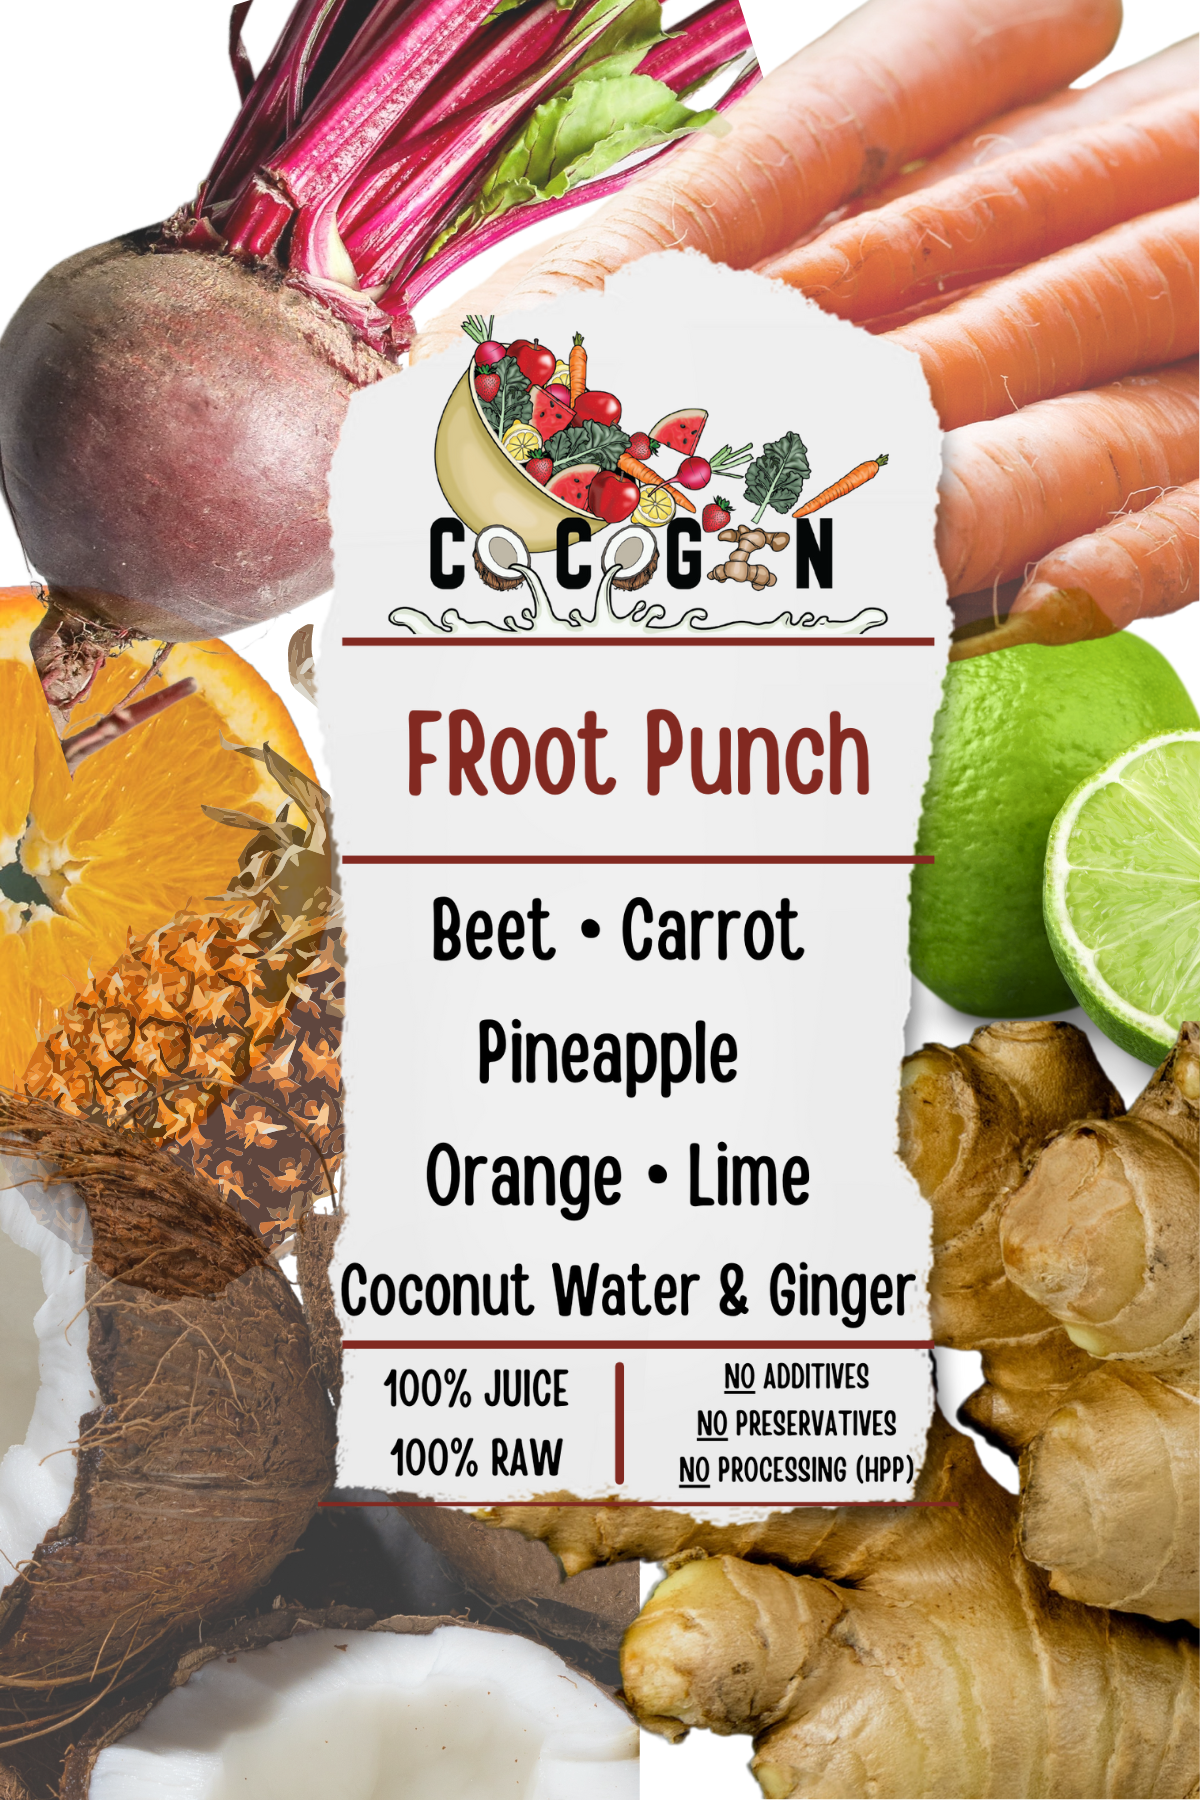 FRoot Punch